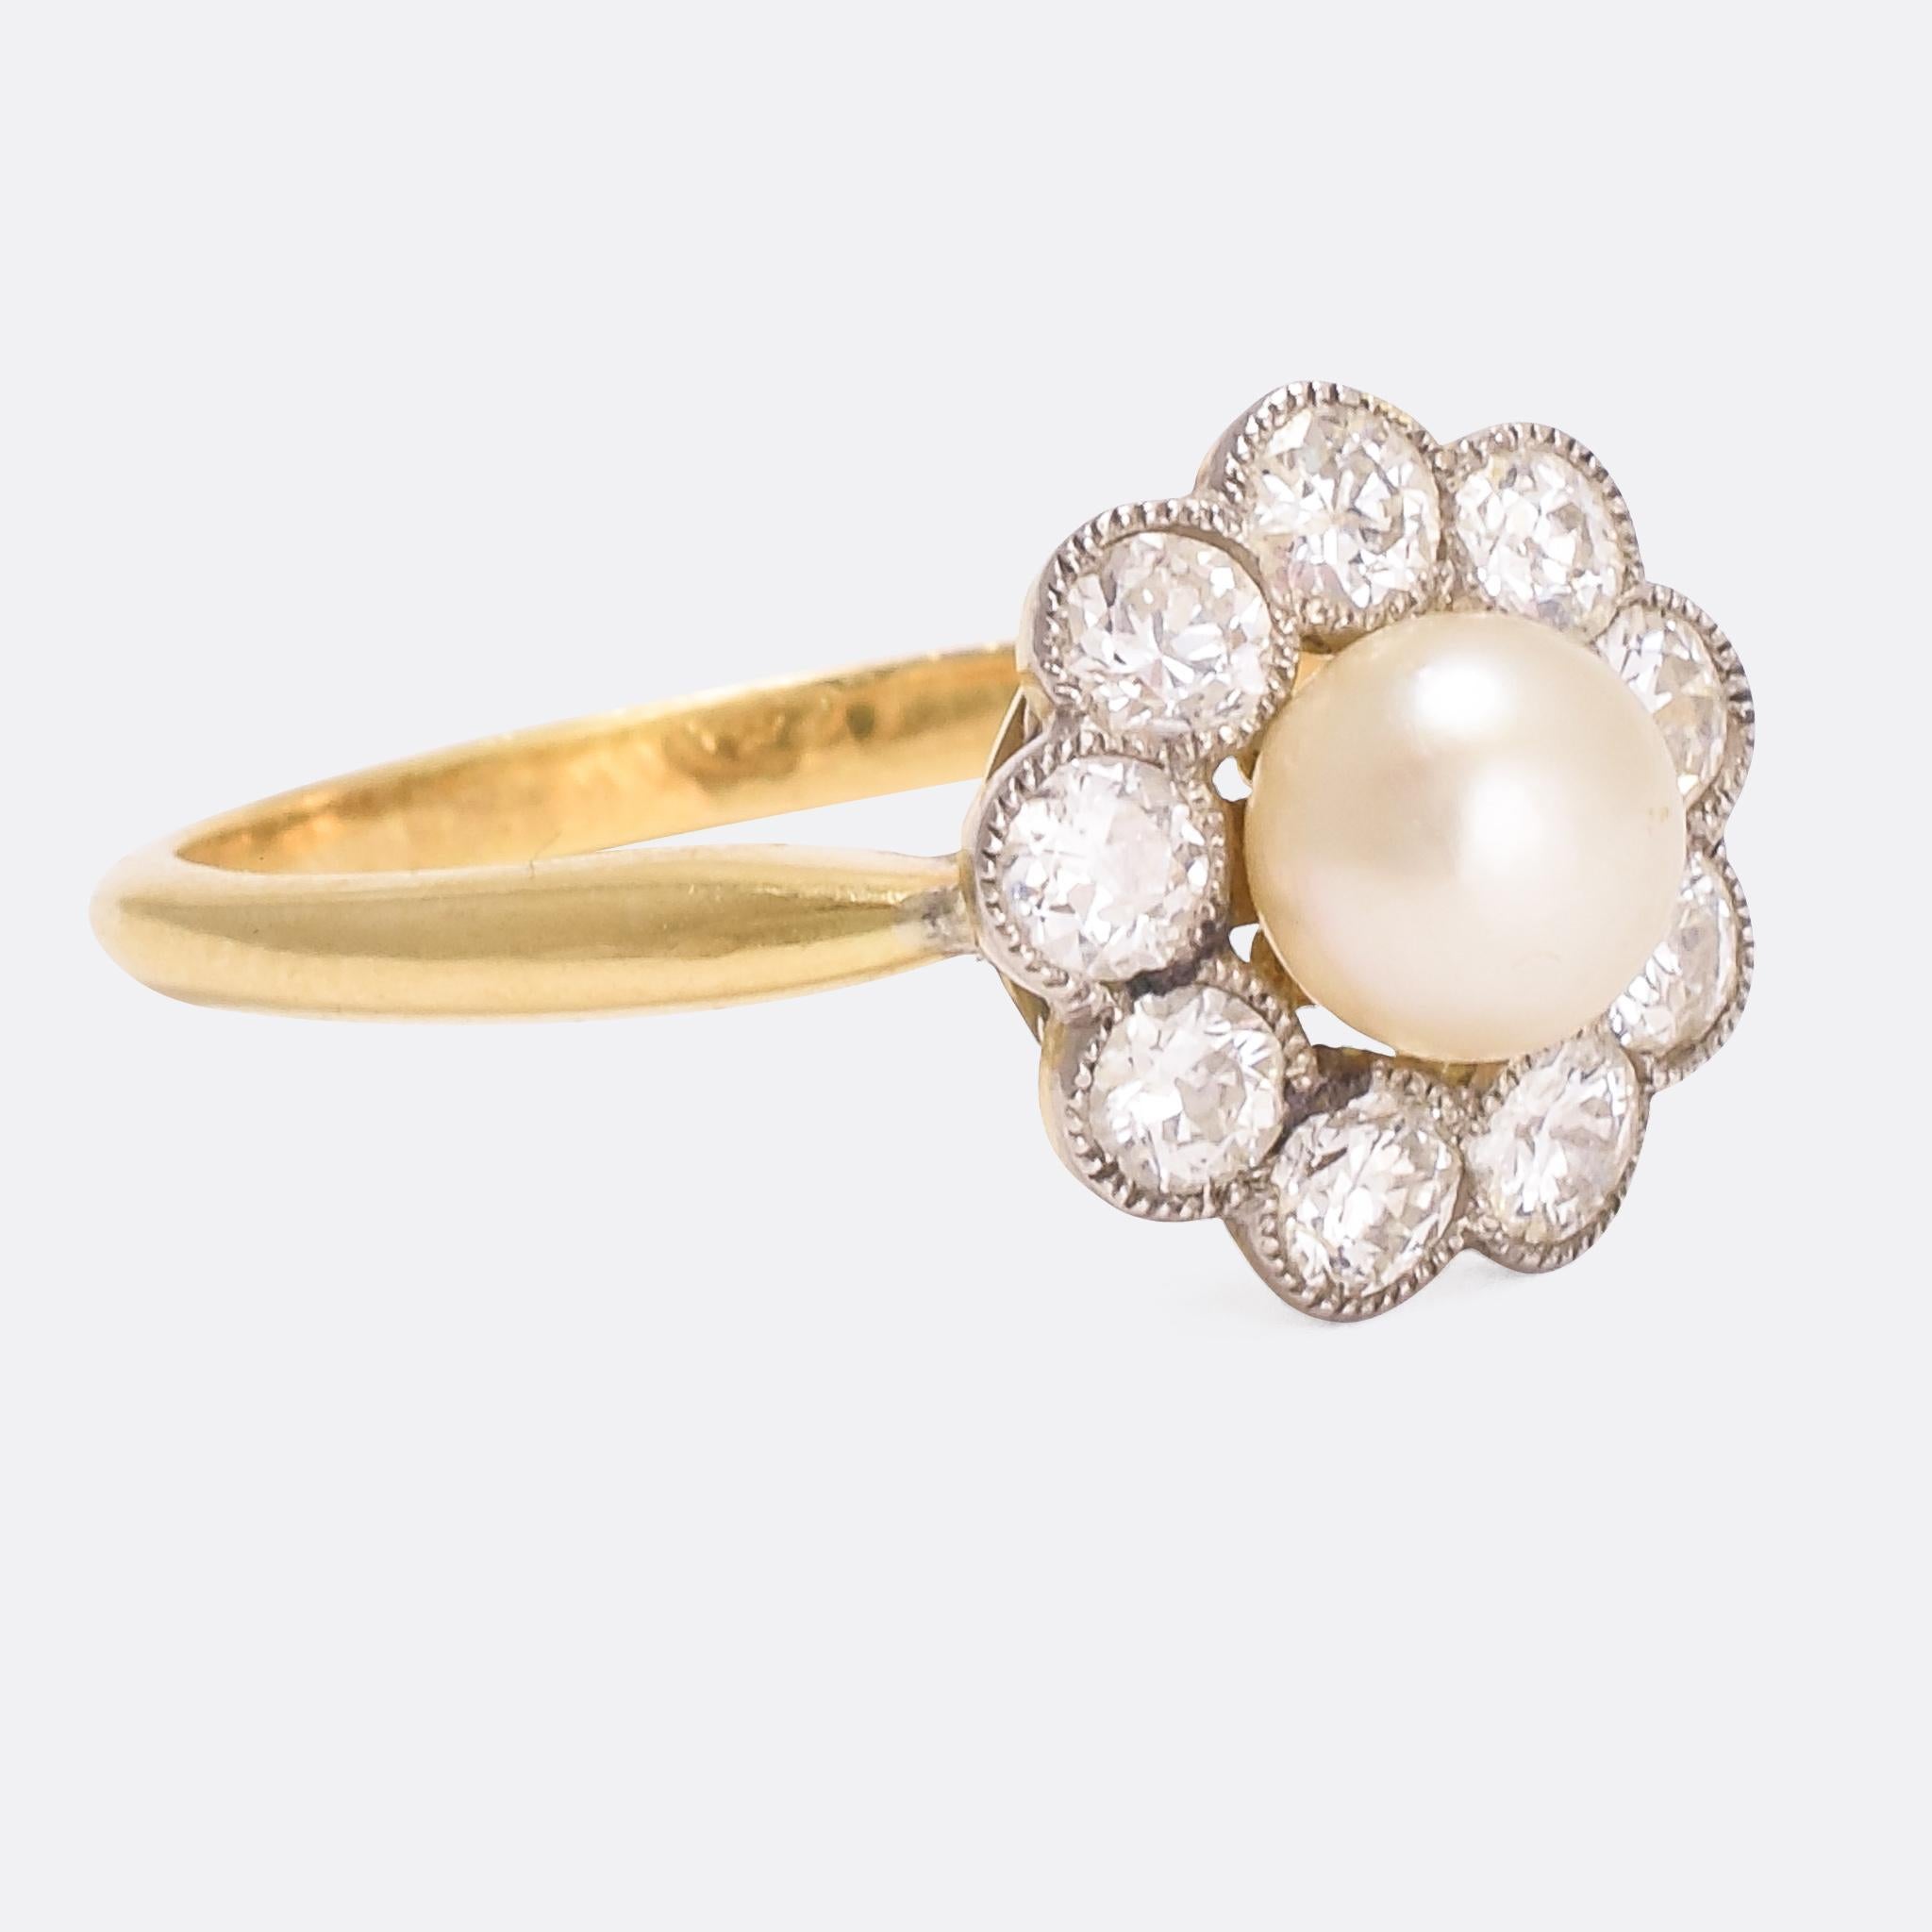 A sweet and perfectly formed antique flower cluster ring set with white diamond petals around a central natural pearl. The diamonds rest in millegrain platinum settings; a gorgeous contrast to the 18k yellow gold band. The openworked gallery allows